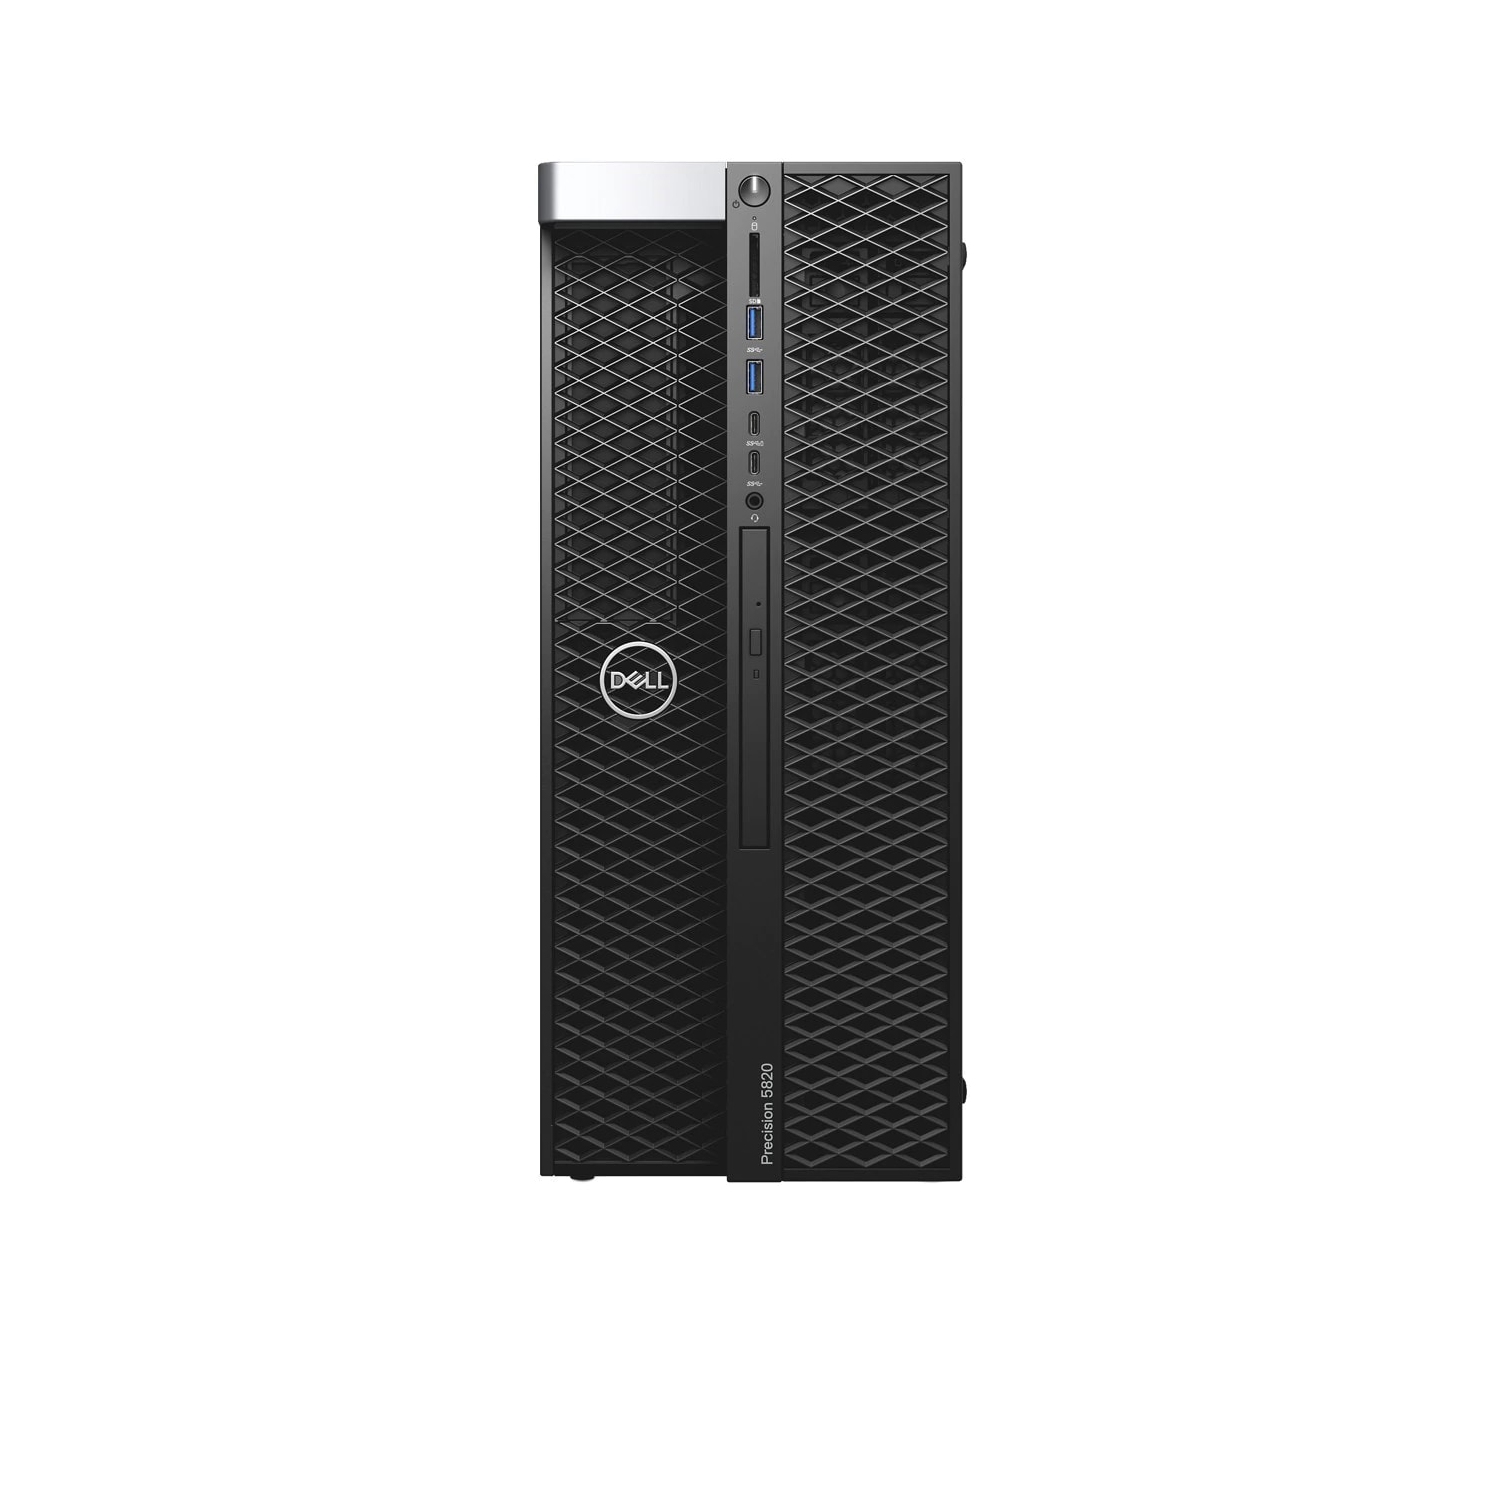 Refurbished (Excellent) - Dell Precision T5820 Workstation Desktop (2018), Core i9, 2TB HDD, 32GB RAM, RTX 5000, 10 Cores @ 4.5 GHz, 10th Gen CPU Certified Refurbished